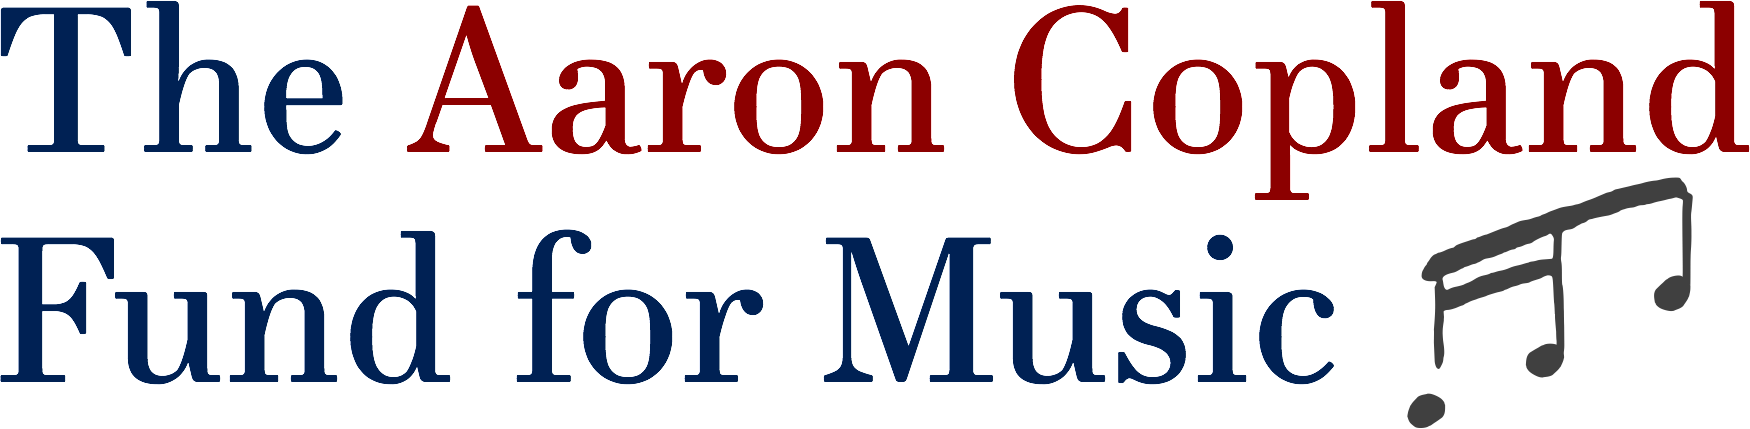 The Aaron Copland Fund for Music  .png